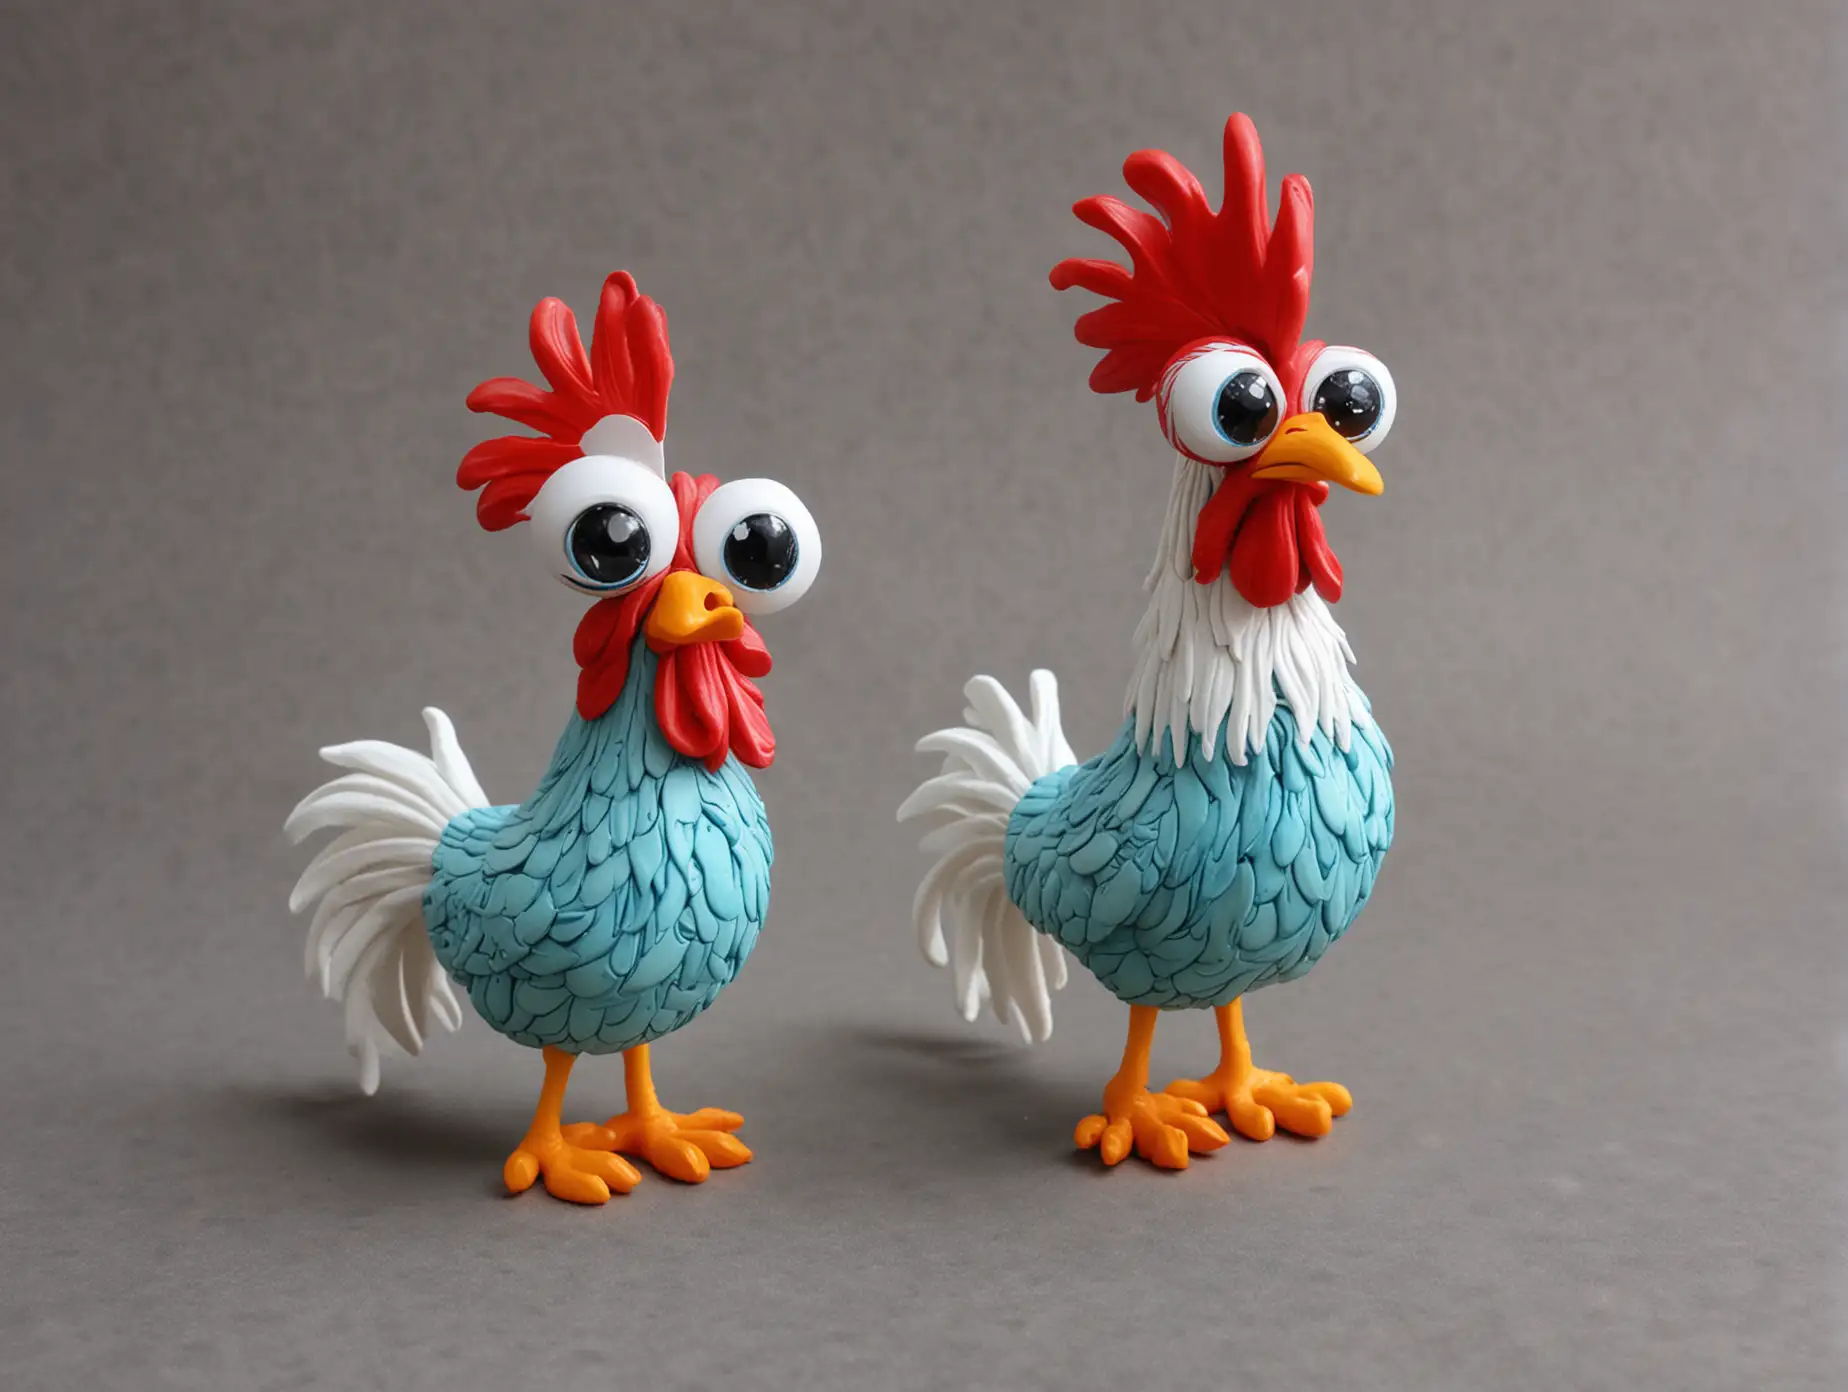 Rooster-Sculpture-with-Big-Eyes-and-Long-Neck-Made-from-Polymer-Clay